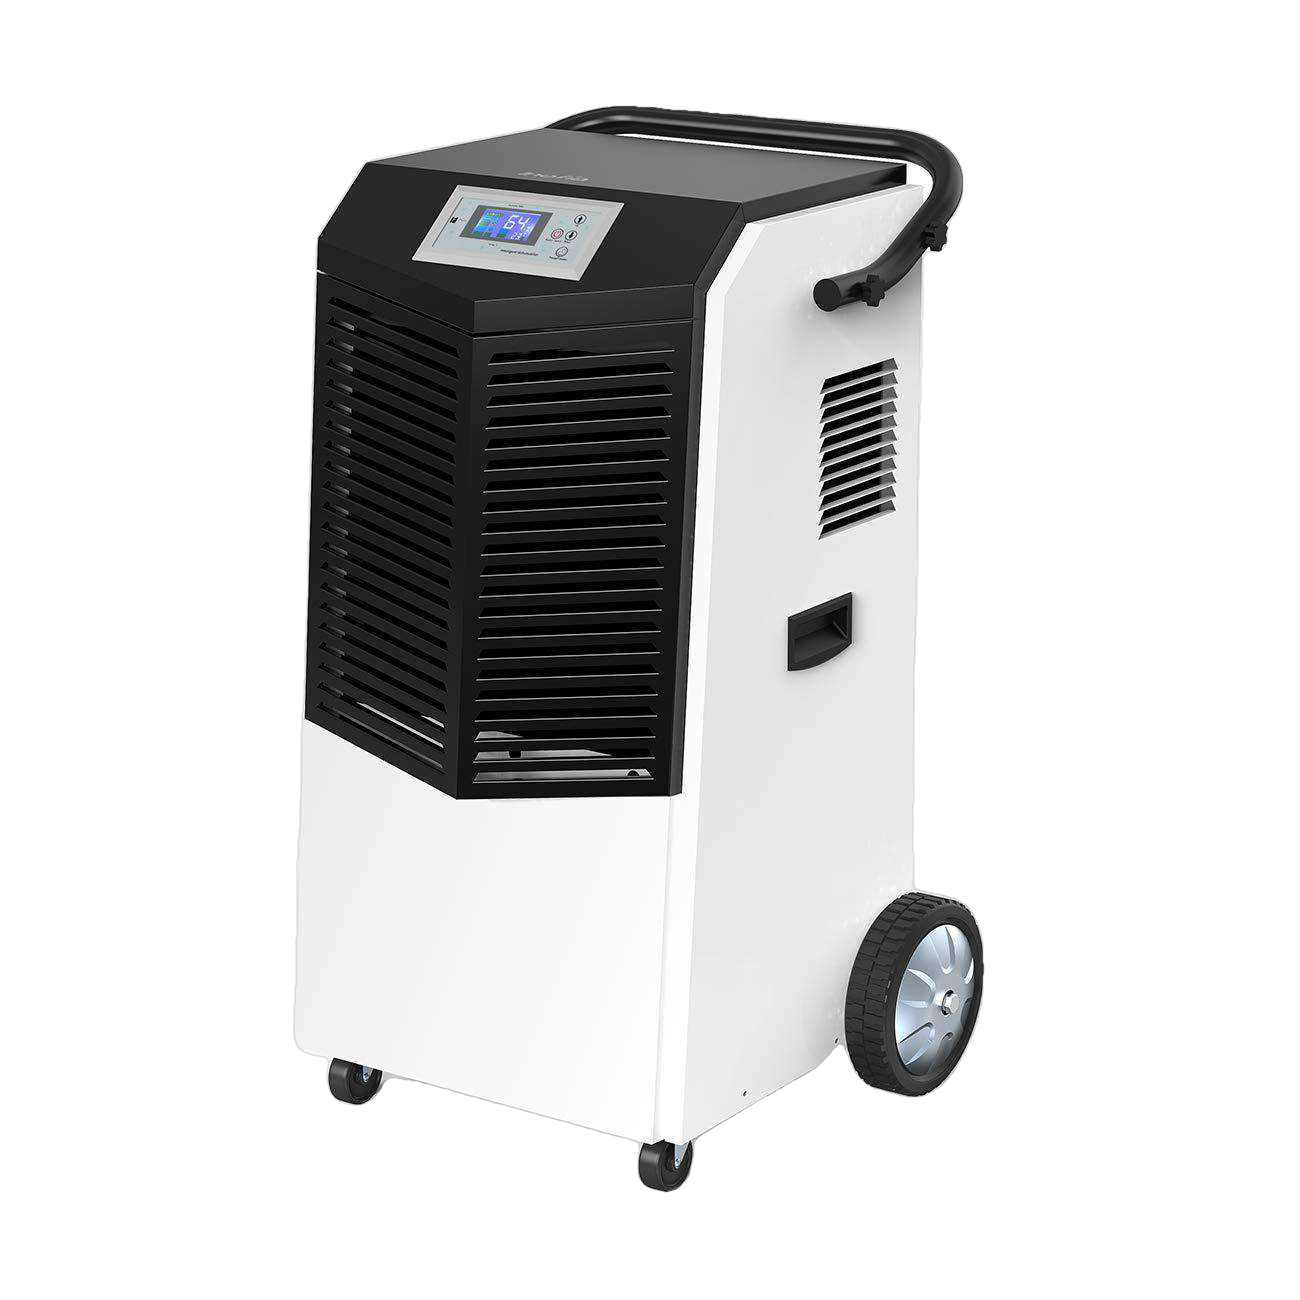 Inofia, Colzer Inofia-003 Large Building 29 Gallons 232 Pints Largest Capacity Compressor Basement/Warehouse Industrial Commercial Dehumidifier New